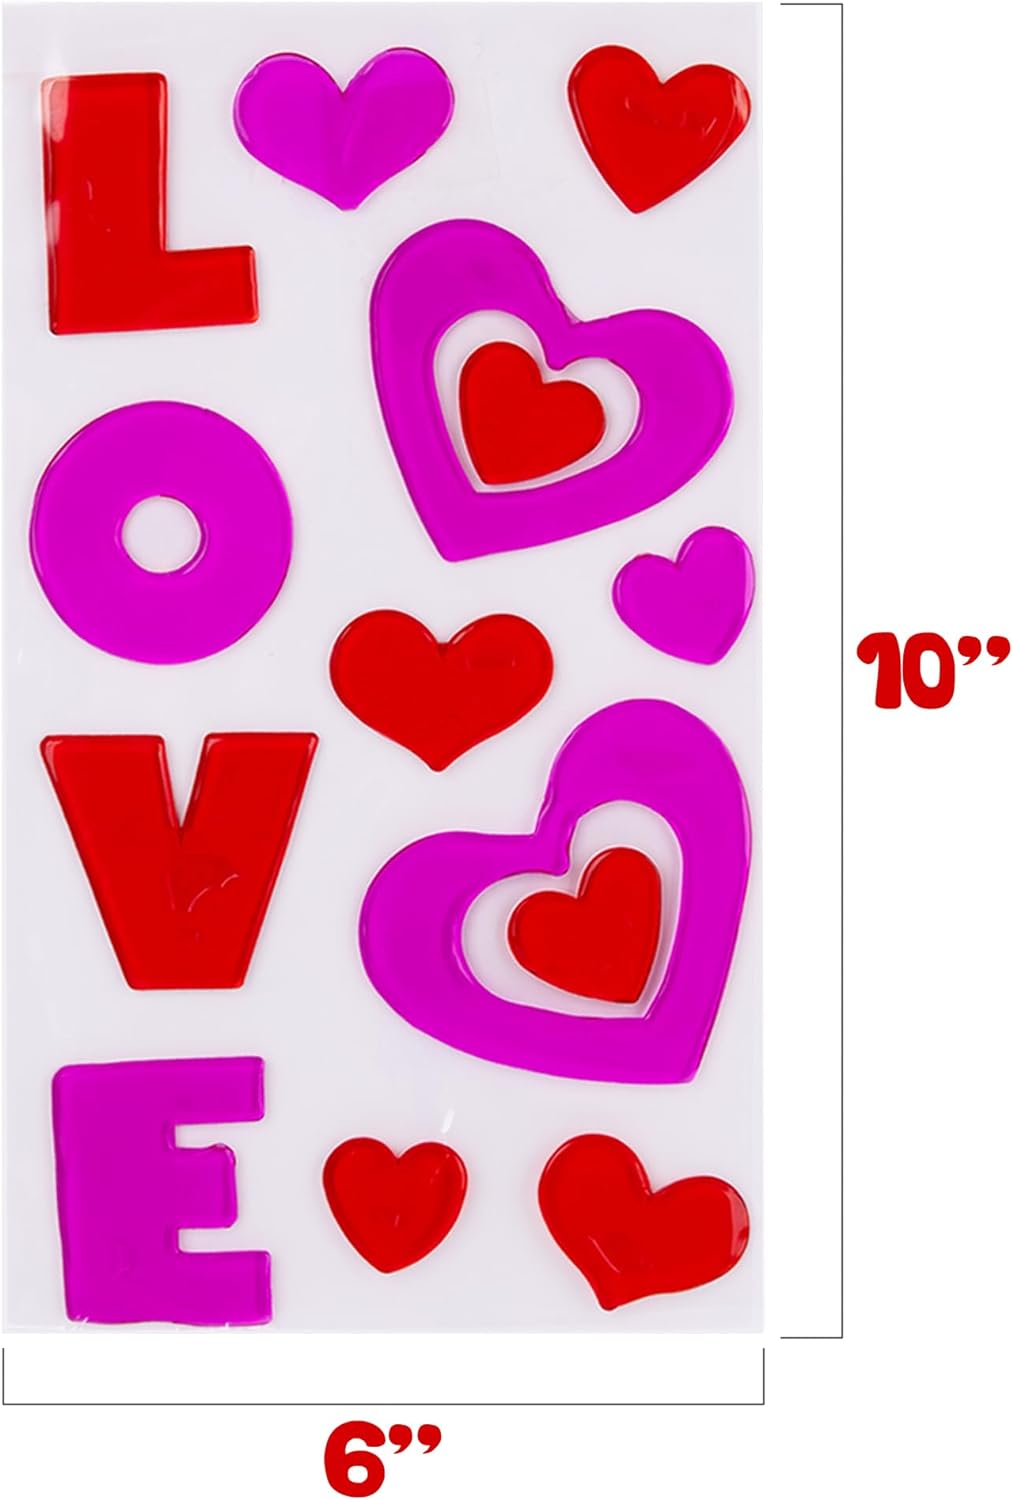 Valentines Day Window Clings - 39 Valentines Day Clings - Heart Window Clings in 3 Sheets - Assorted Heart Window Decals with Vibrant Colors - Valentines Day Window Decorations for Cute Decor